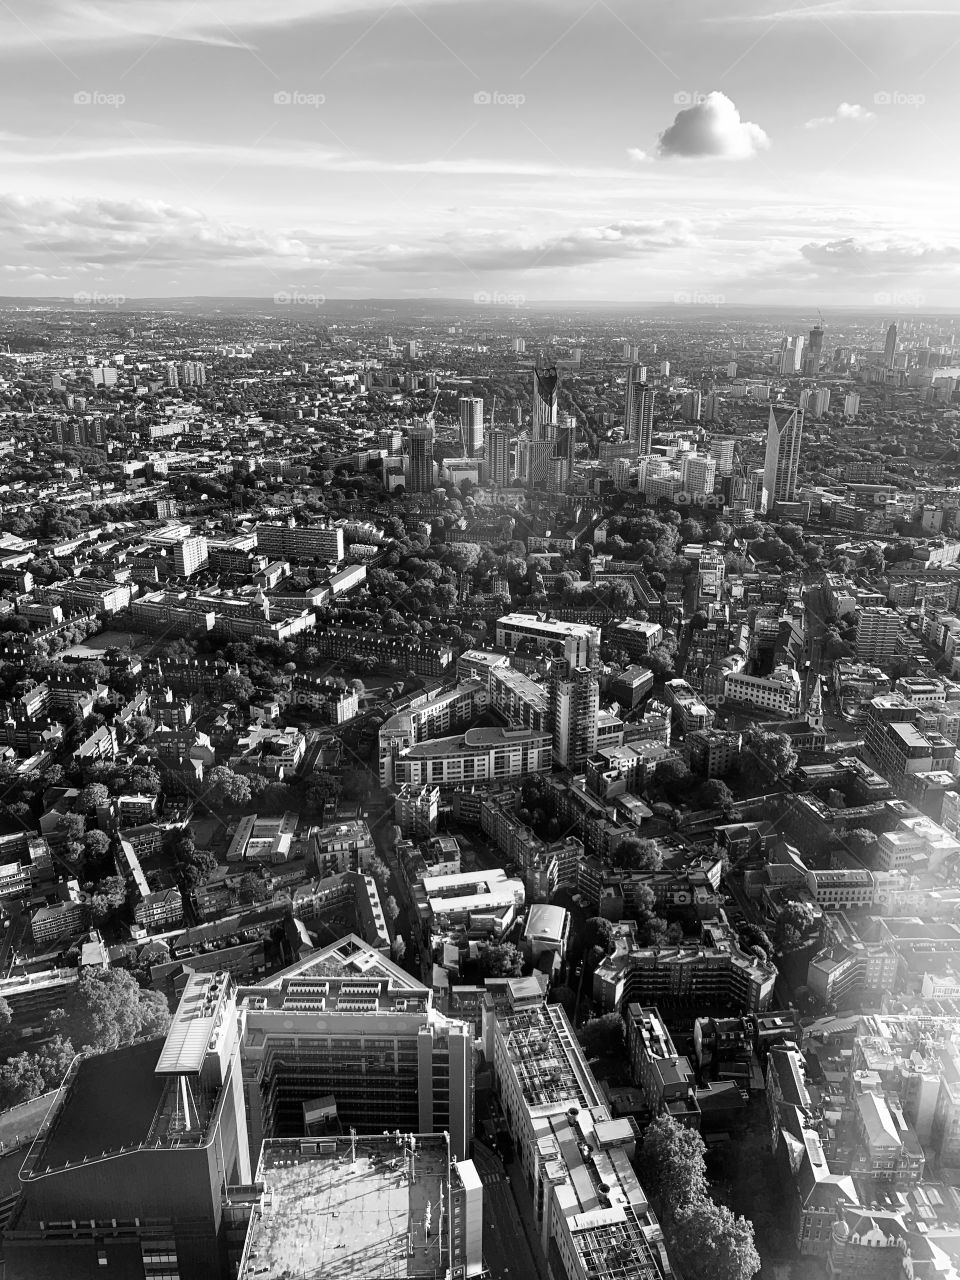 London views from the Shard.